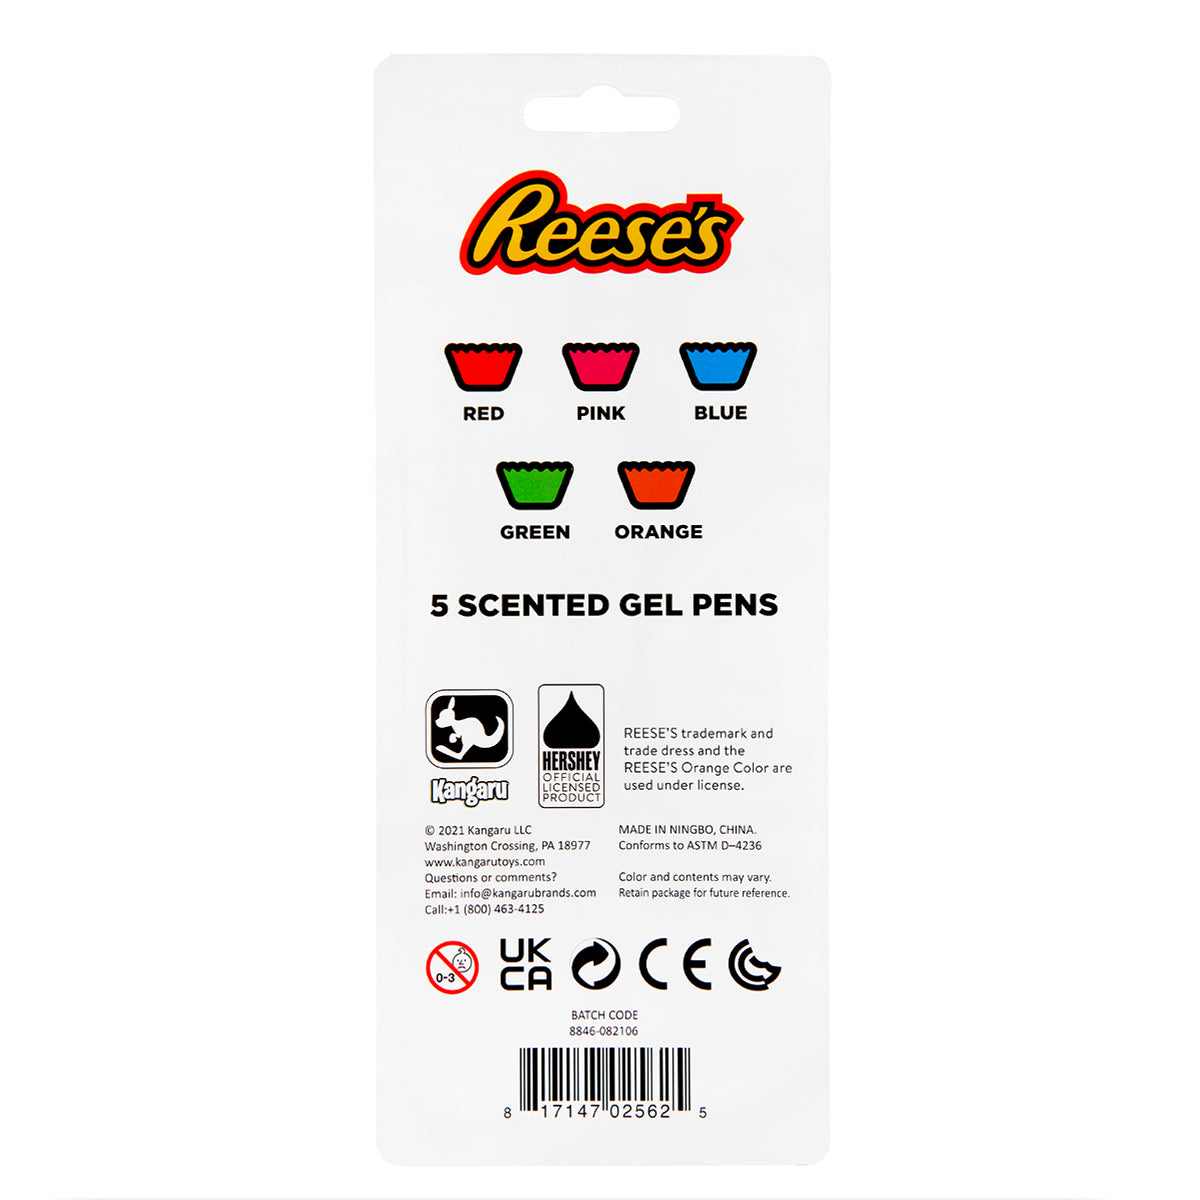 REESE's Scented Rainbow Pen